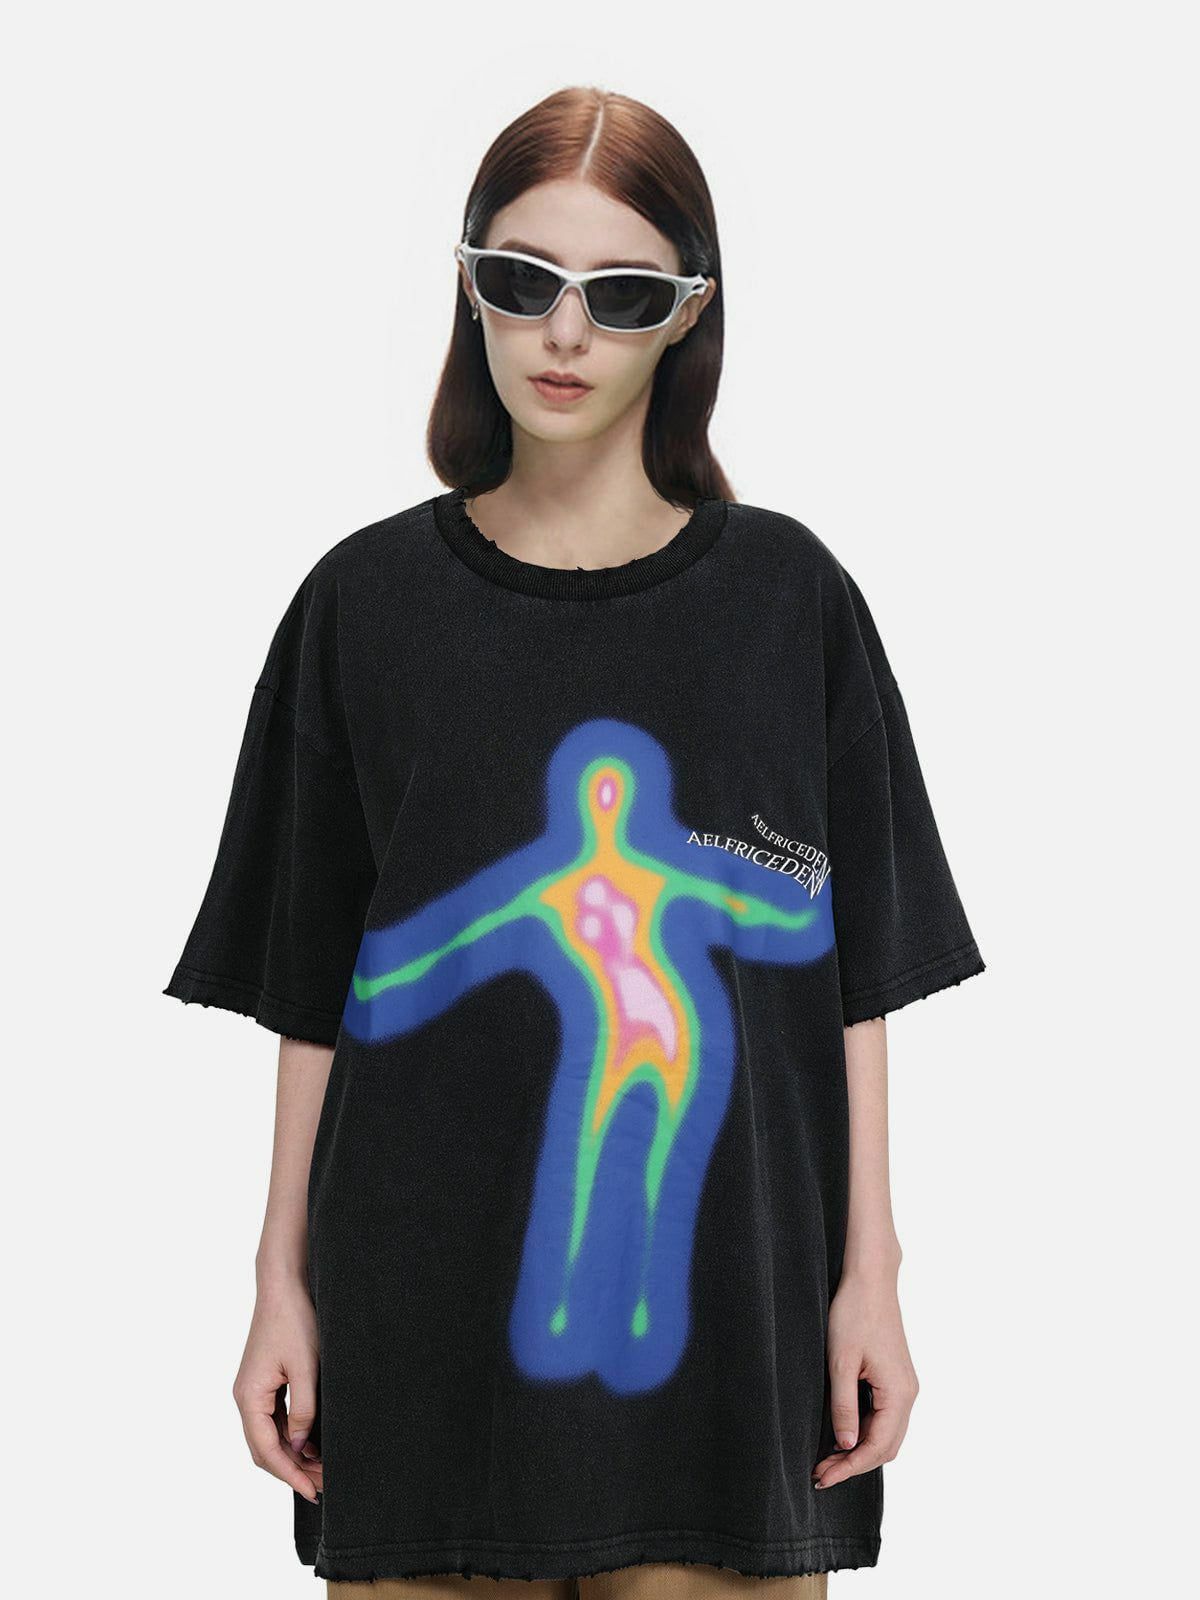 retro distorted graphic tshirt edgy streetwear for a youthful vibe 7733